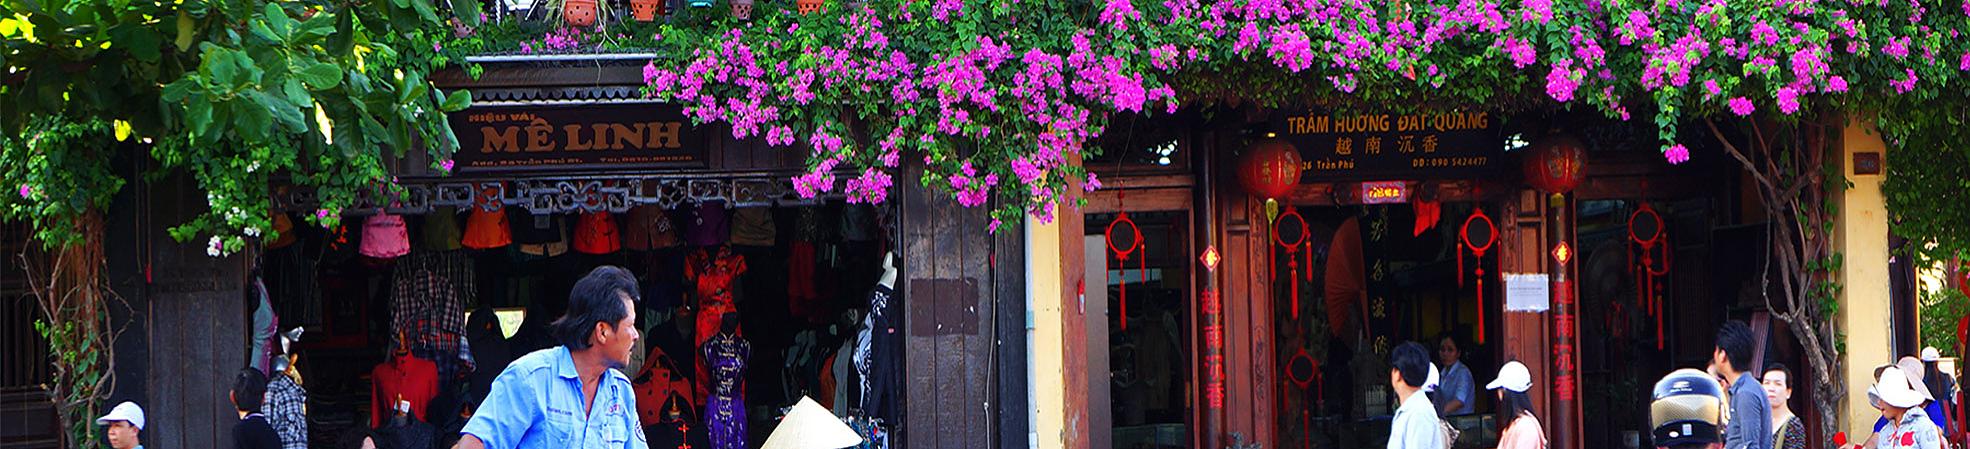 Hue and Hoi An – Two of Vietnam's 